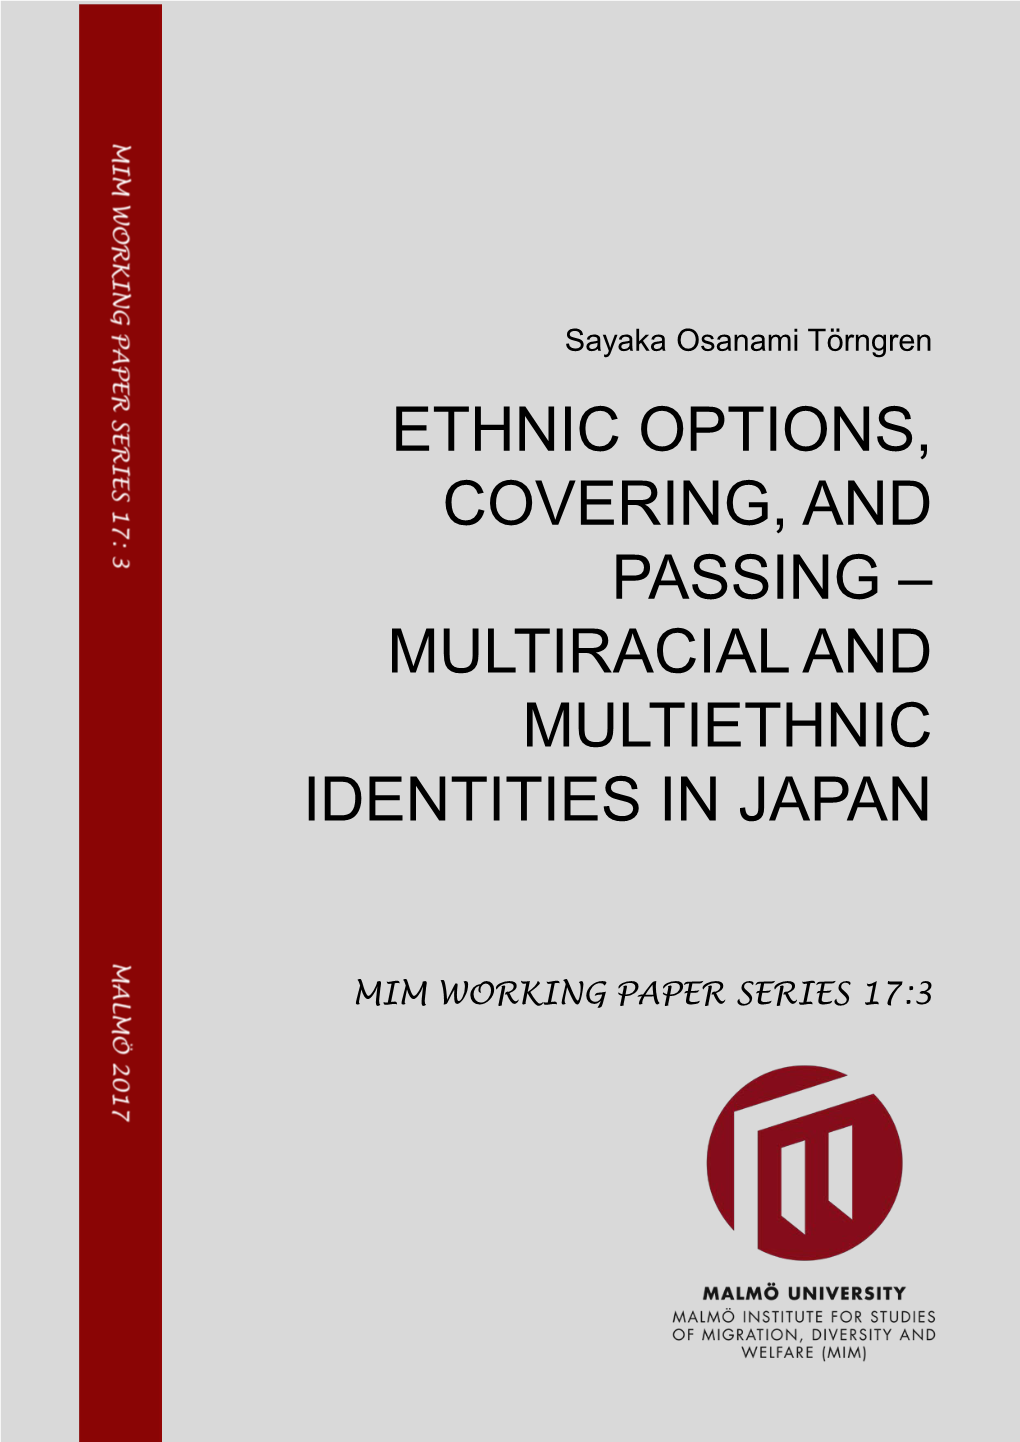 Ethnic Options, Covering, and Passing – Multiracial and Multiethnic Identities in Japan